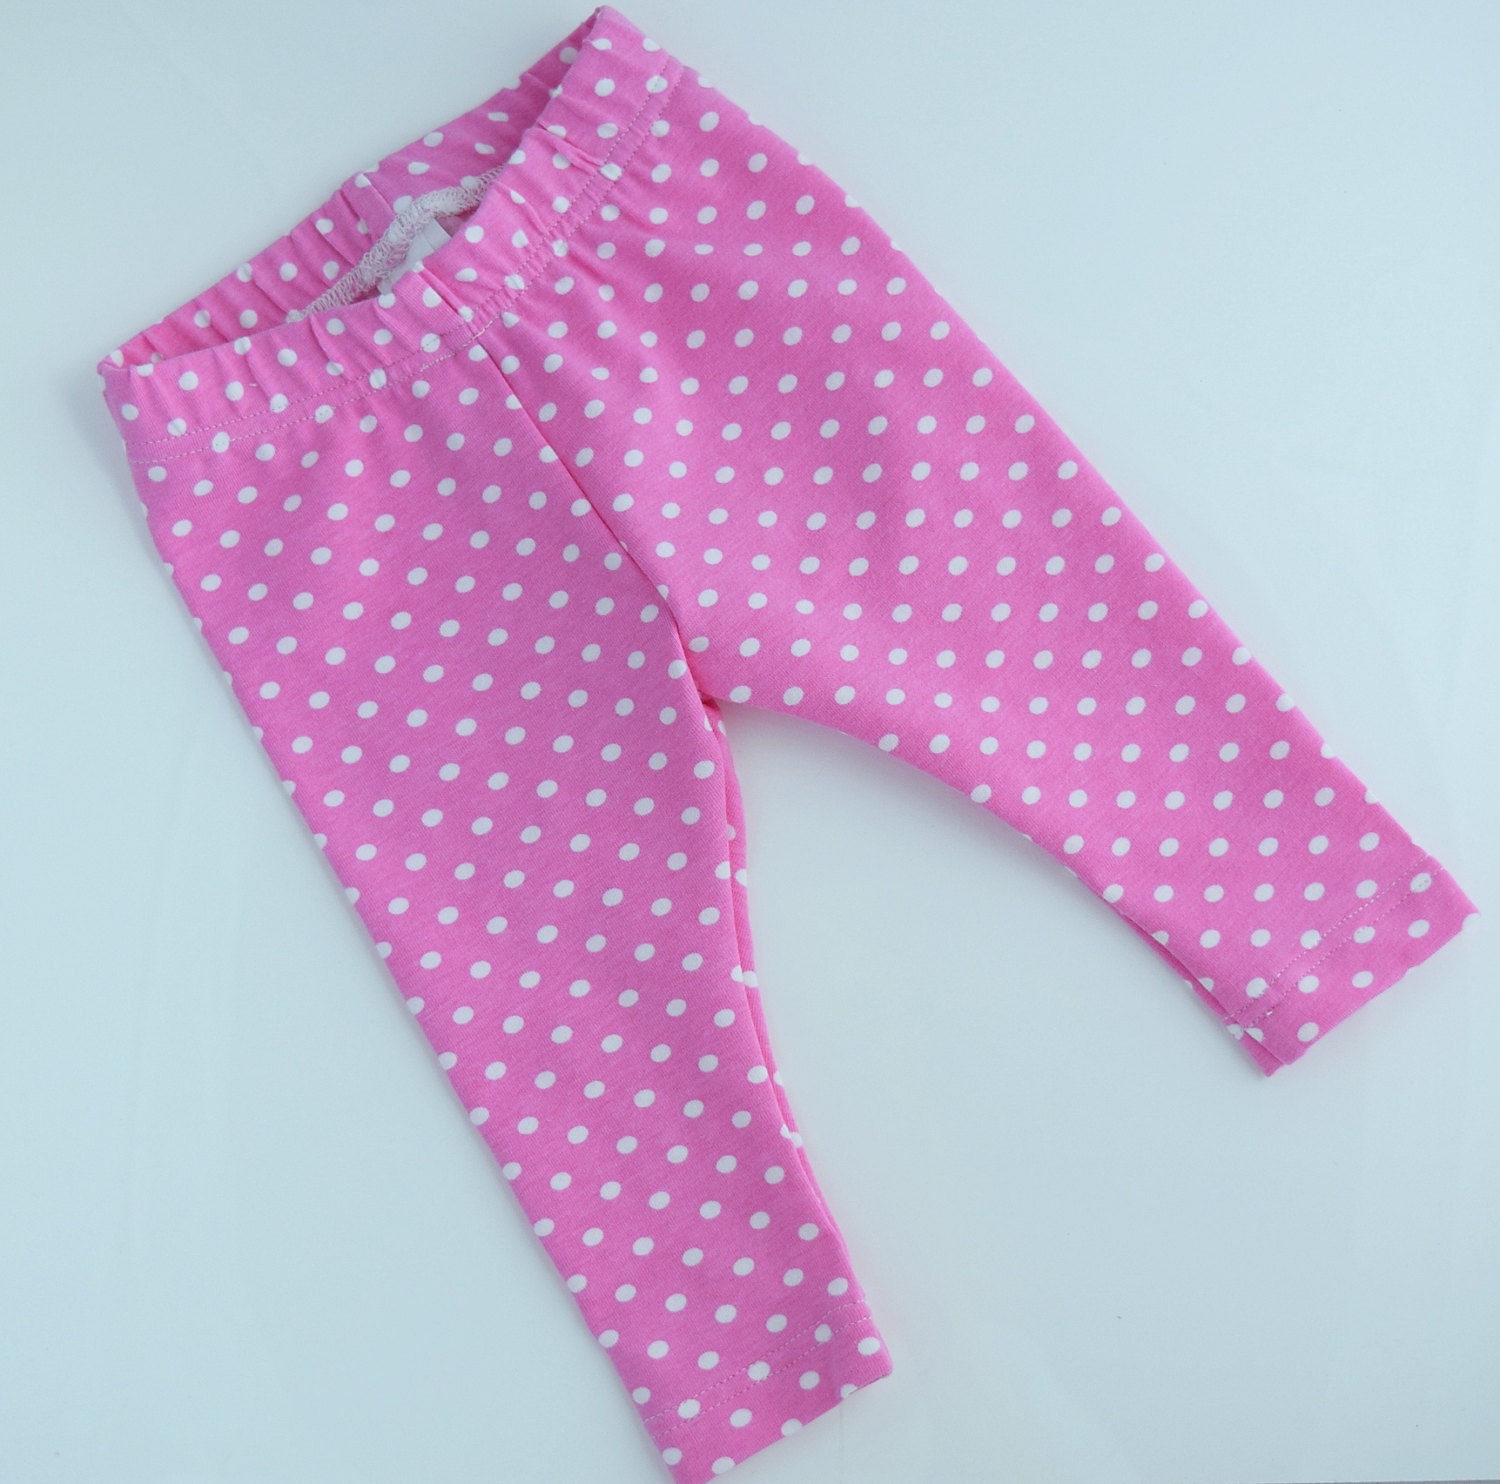 Polka Dot Leggings Baby Girl Clothes Pink Baby by Zookaboo on Etsy